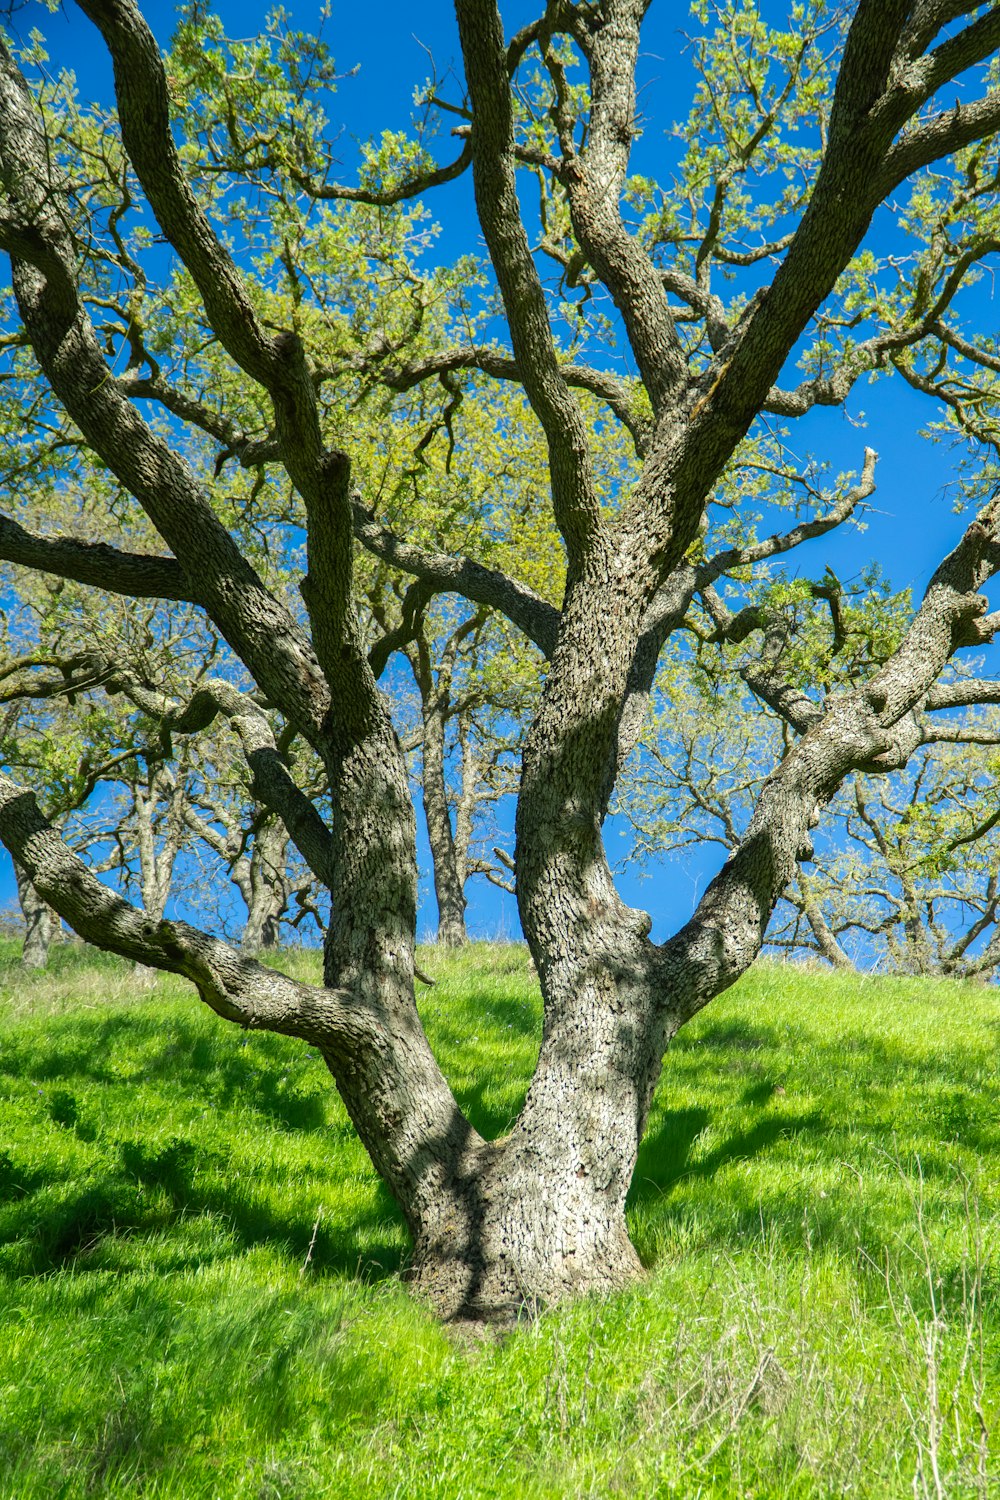 a tree in the middle of a grassy field